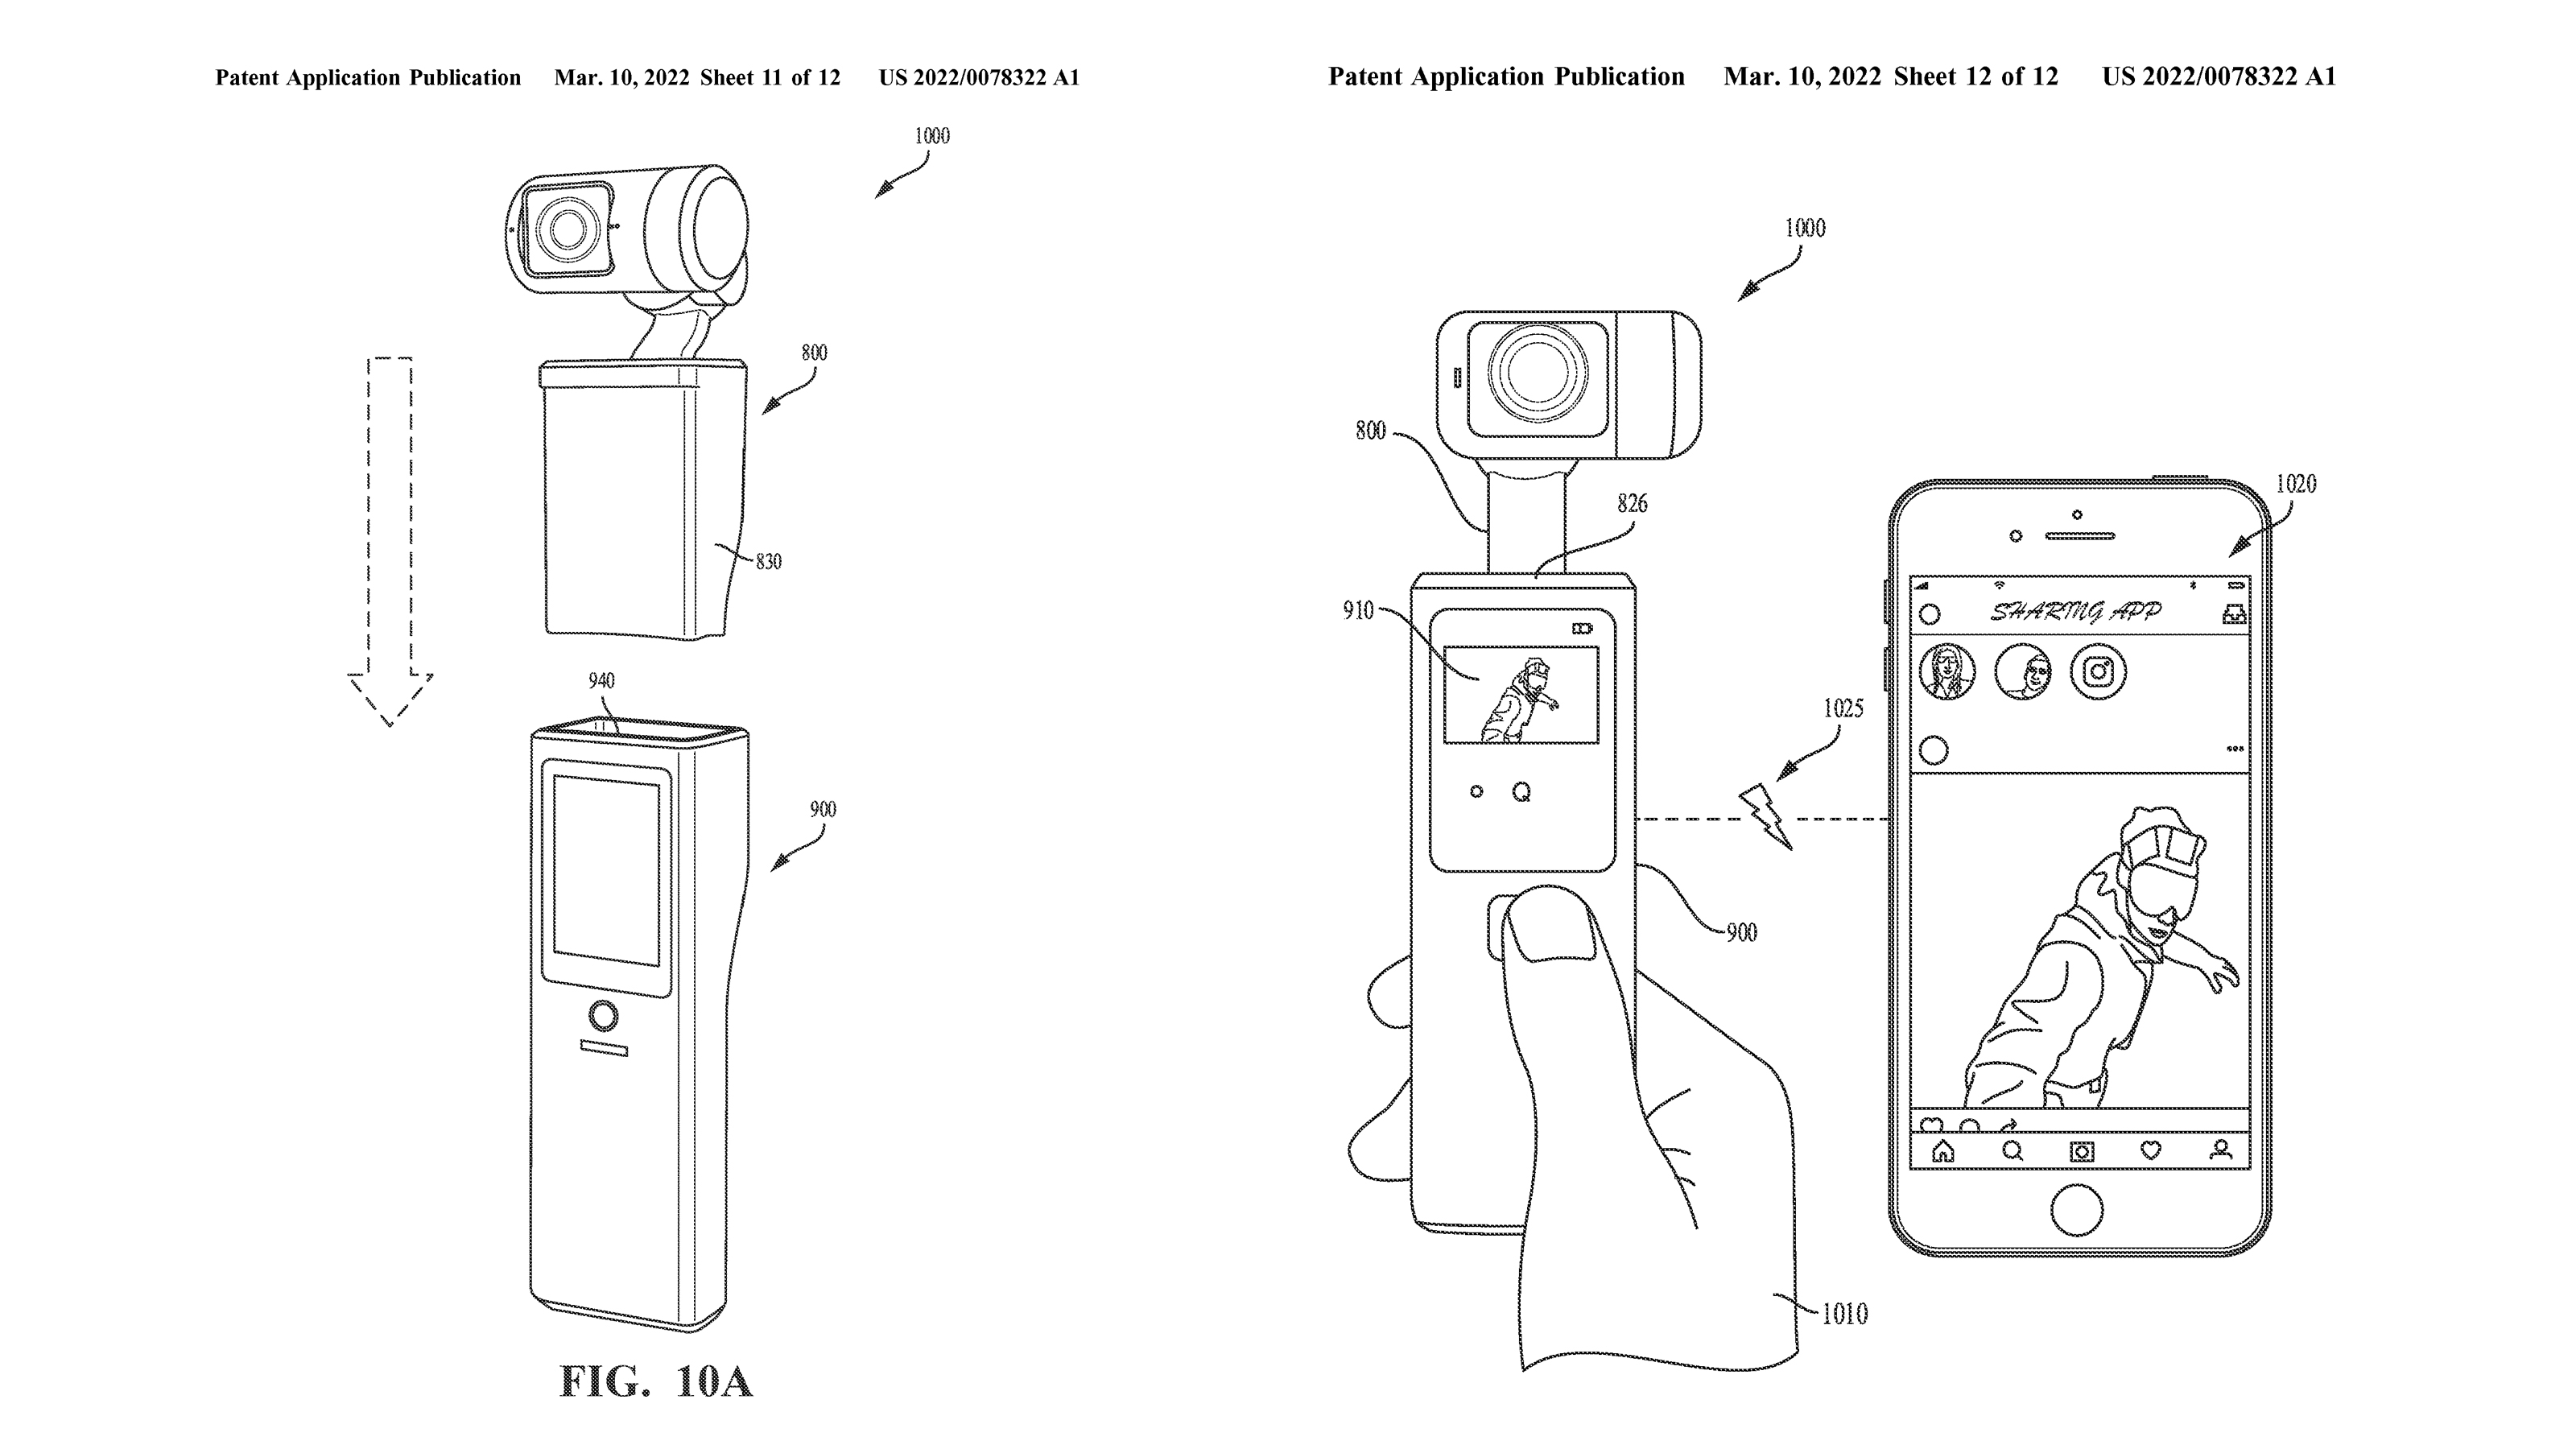 Graphics from GoPro patents